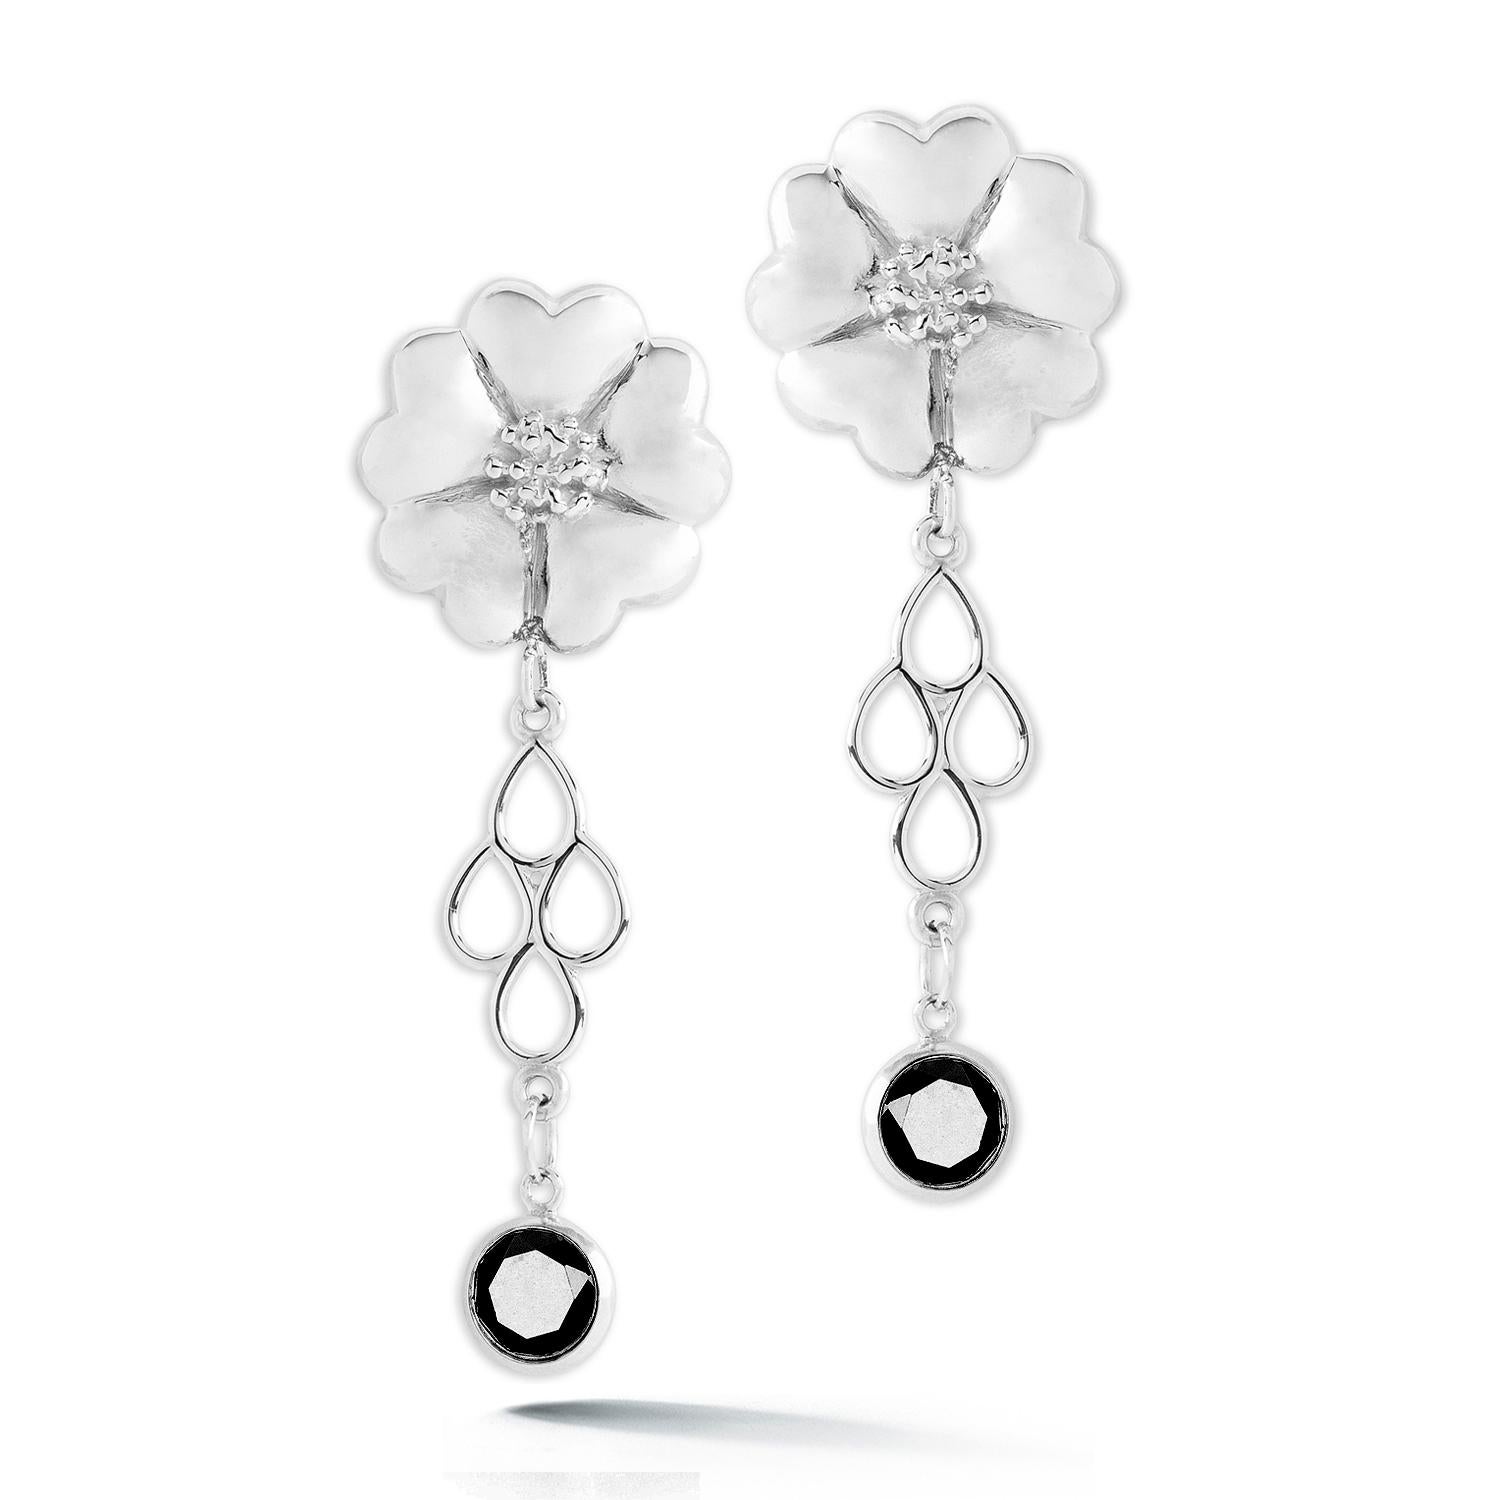 Designed in NYC

.925 Sterling Silver 2 x 6 mm Dark Blue Topaz Blossom Stone Chandelier Earrings. No matter the season, allow natural beauty to surround you wherever you go. Blossom stone chandelier earrings: 

	Sterling silver 
	High-polish finish